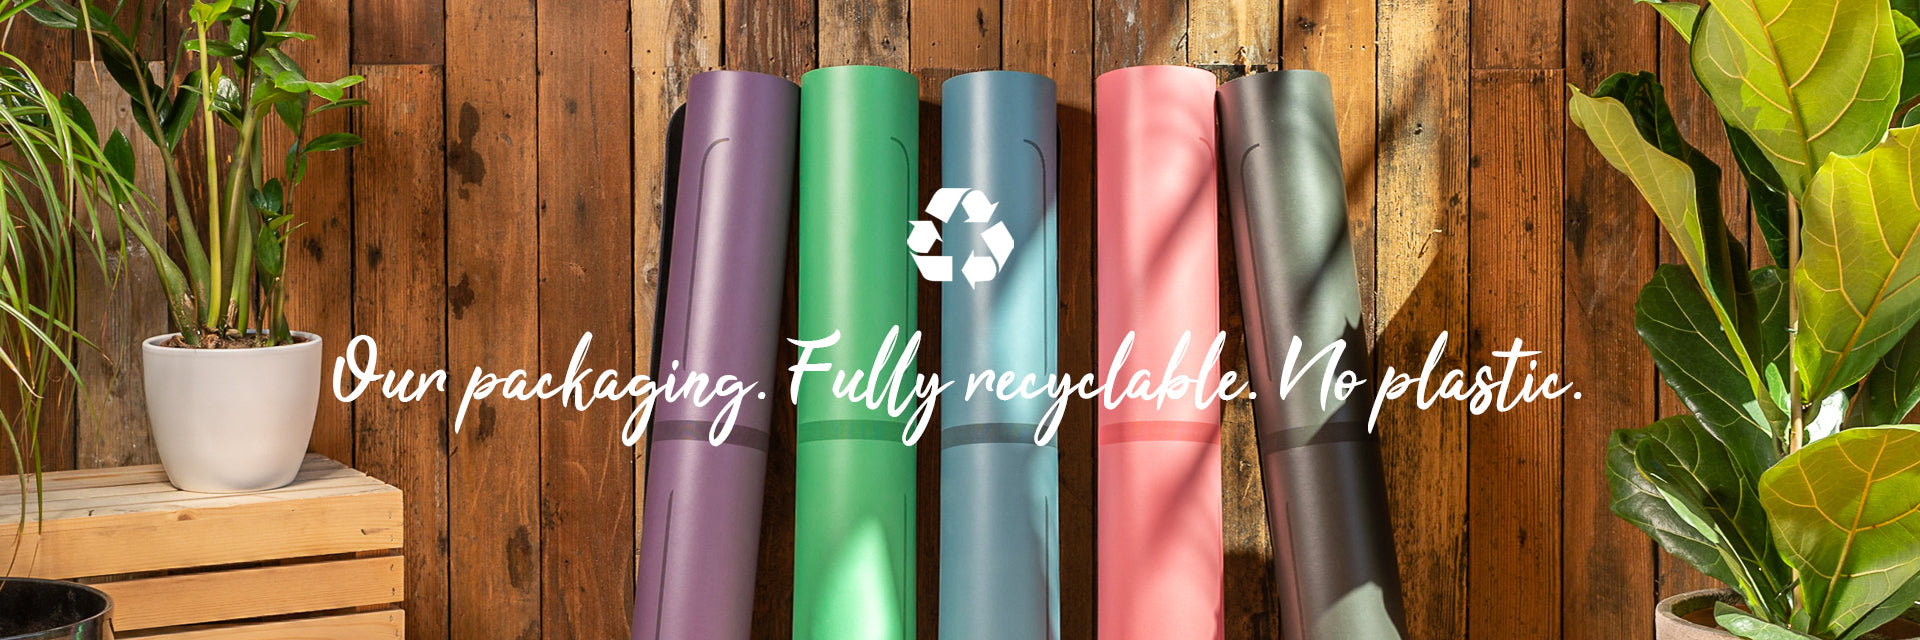 Liforme Happiness Yoga Mat - The World's Best Eco-Friendly, Non Slip Y —  ShopWell